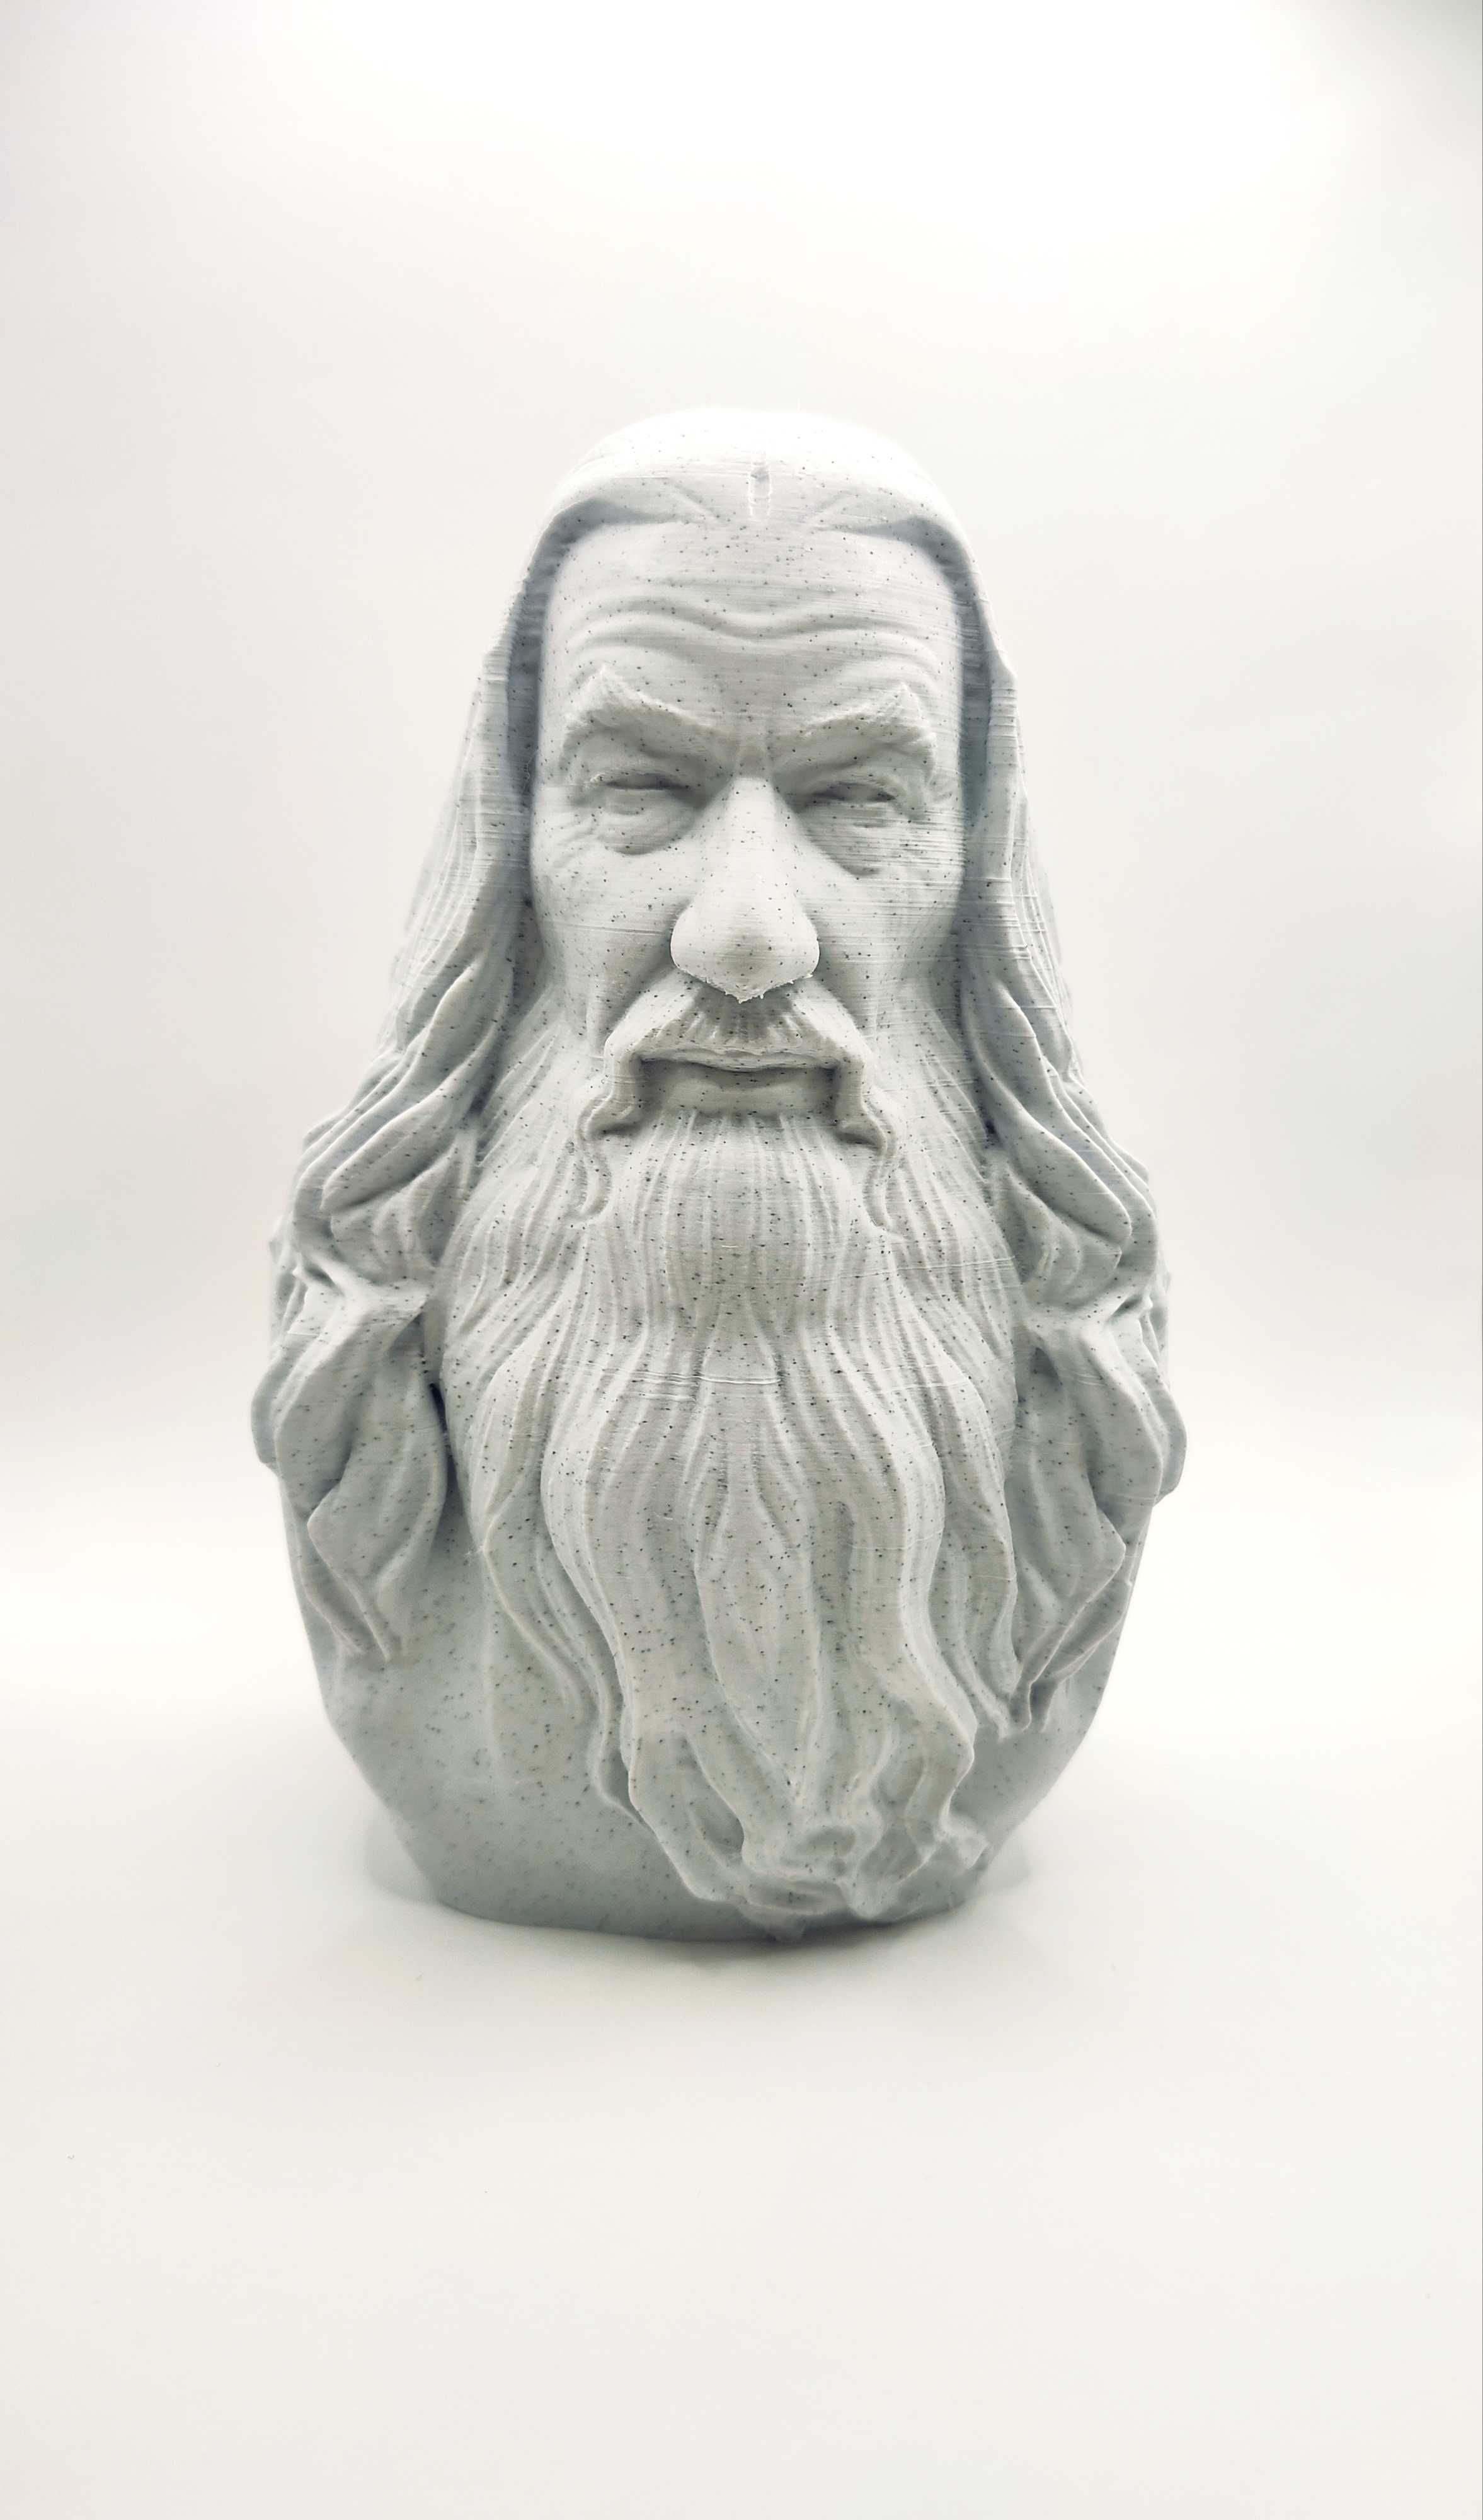 Figurina / Statuie / Bust Gandalf din The Lord of the Rings